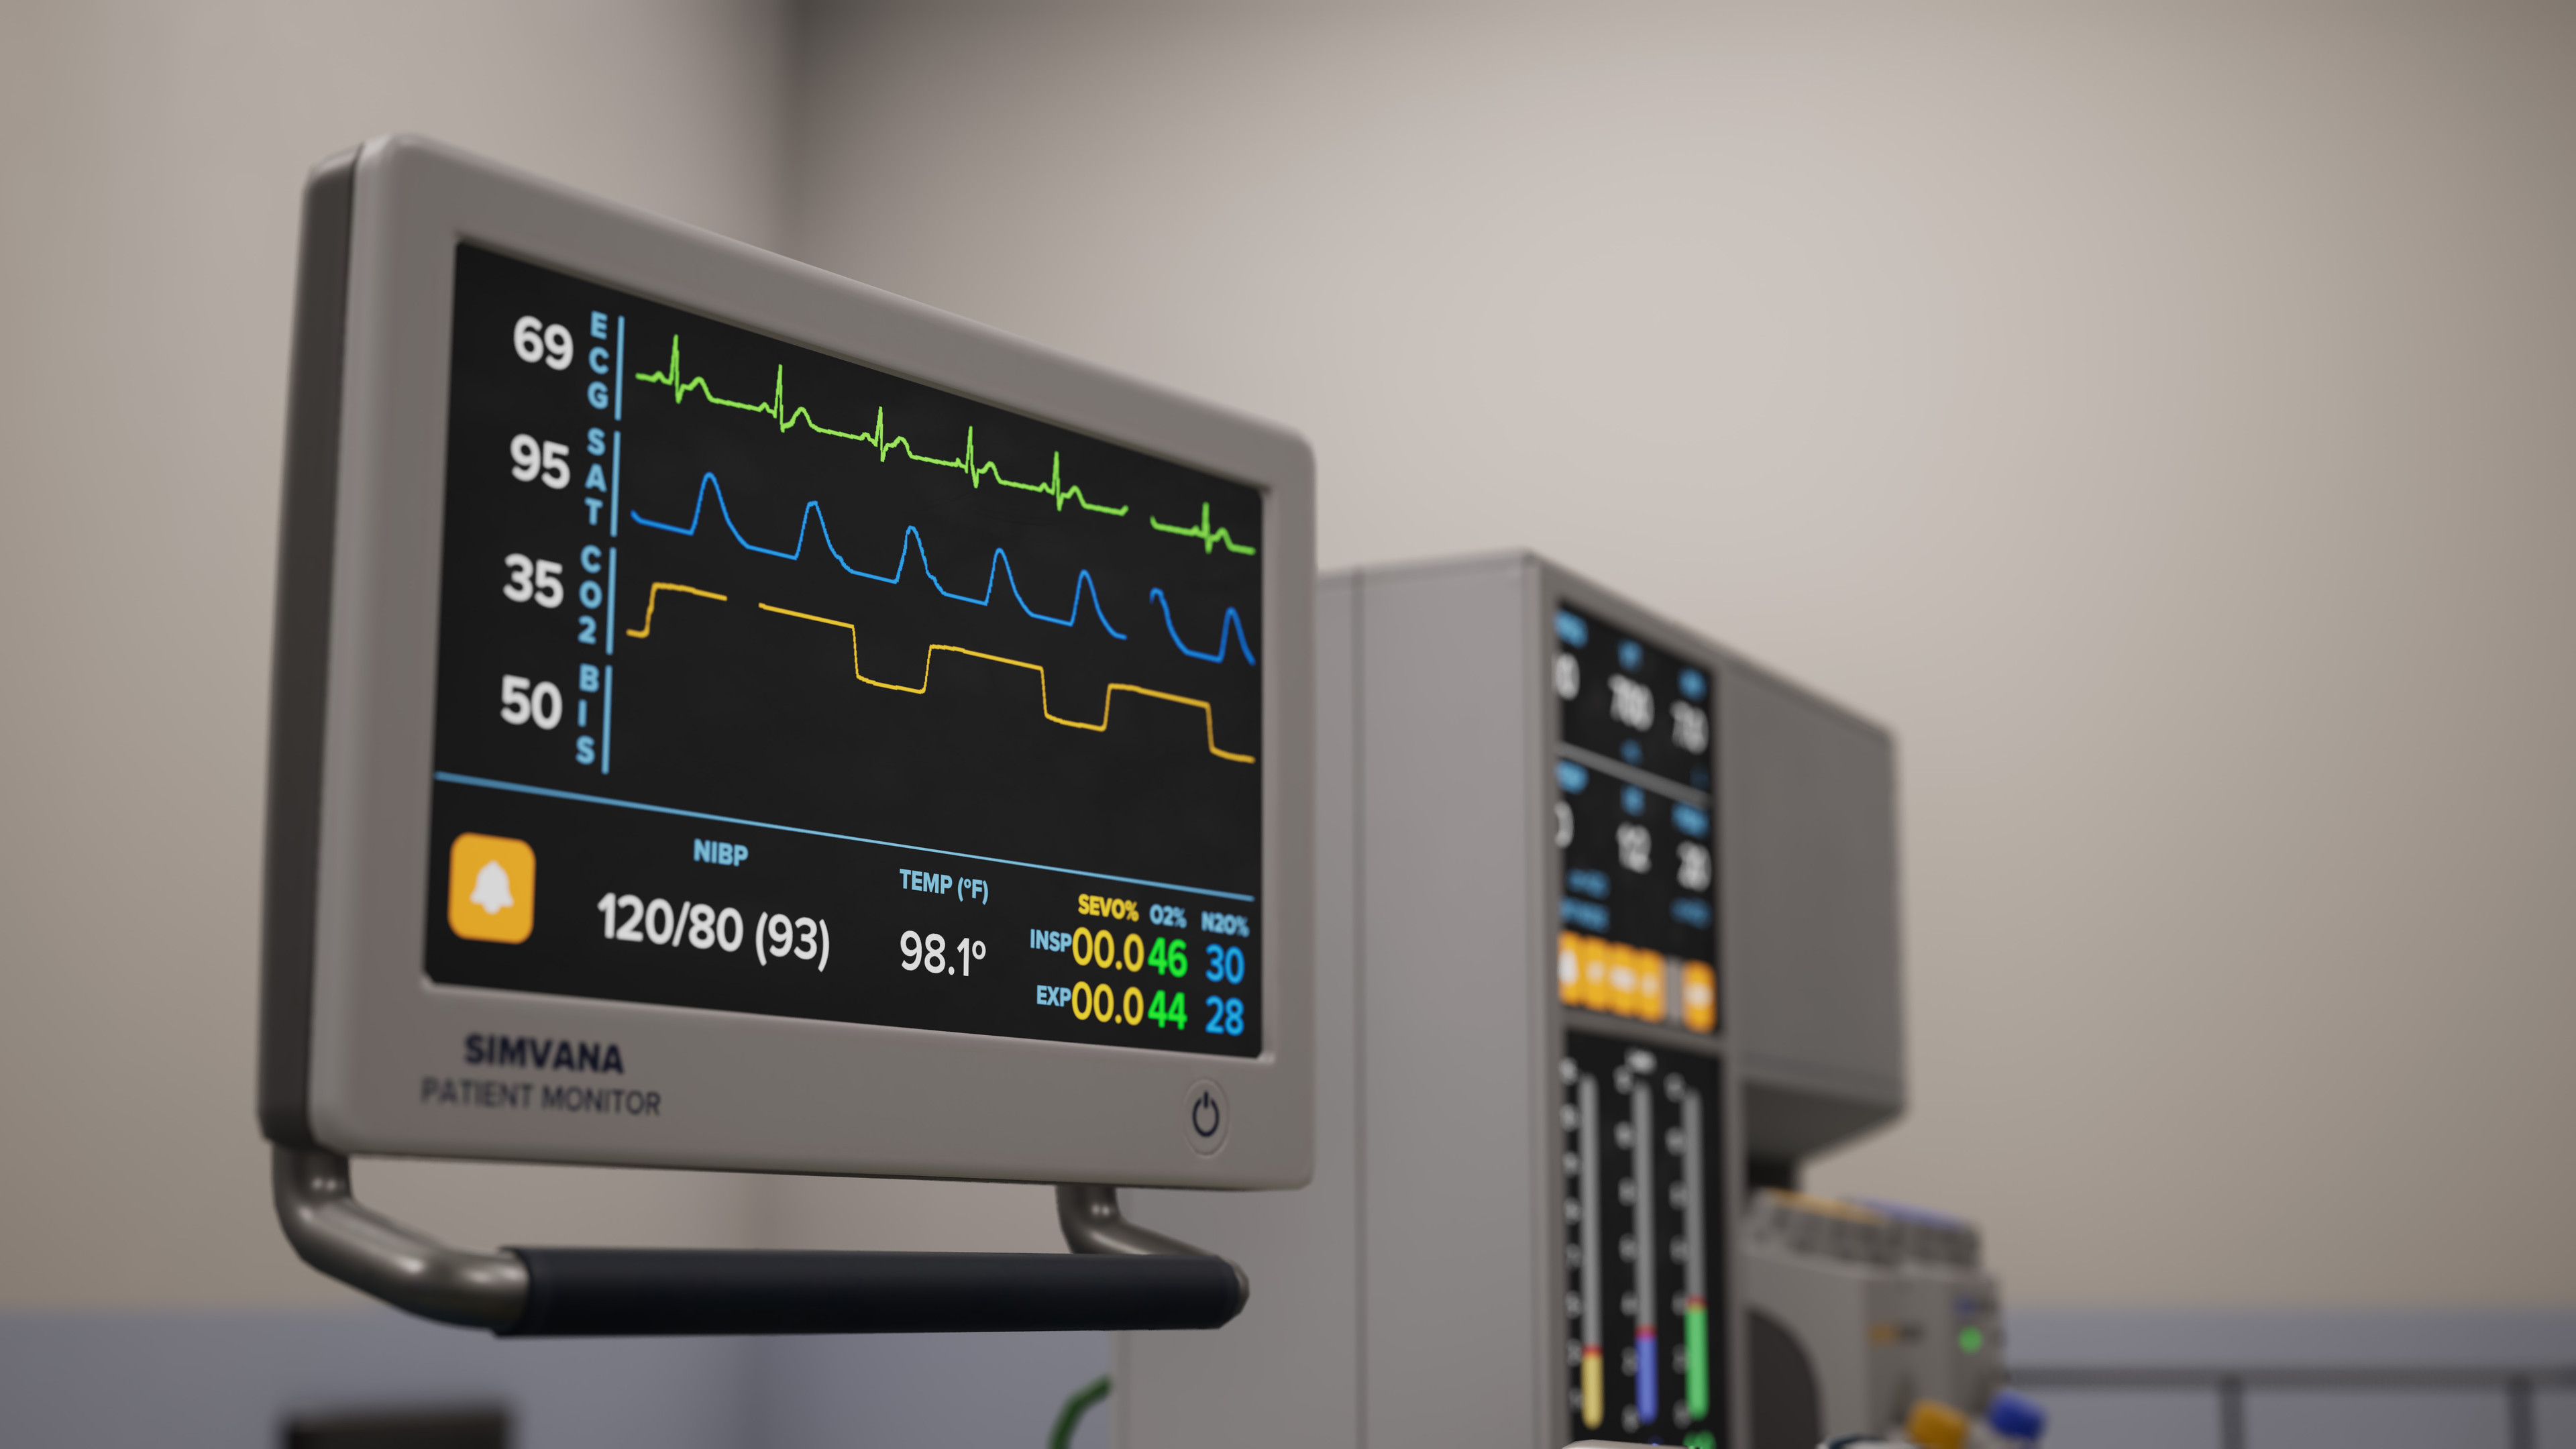 I was responsible for prototyping the custom functionality to draw the patient monitor graphs in real time during the simulation.